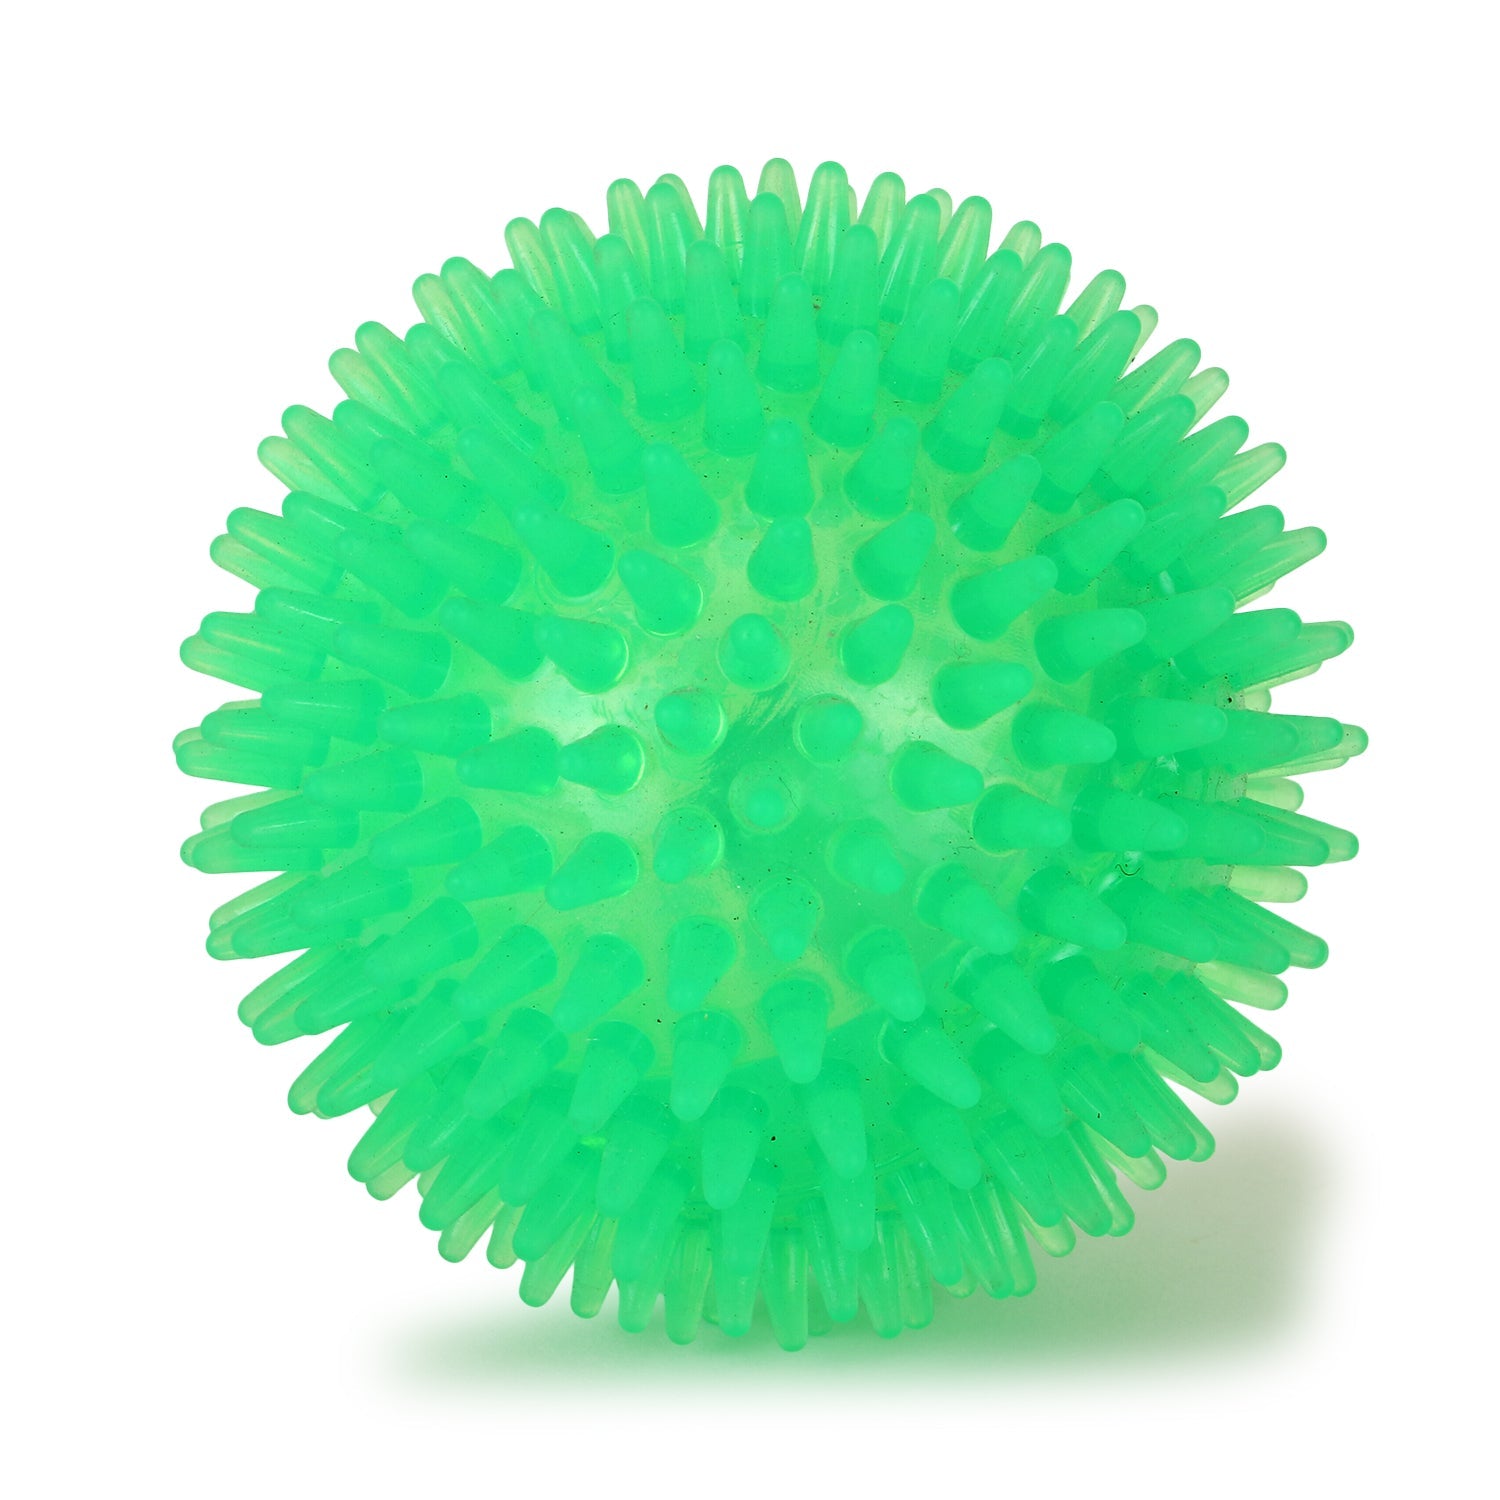 Spiked & Squeaky Chew Ball, Toy for Dogs & Puppies (Green)